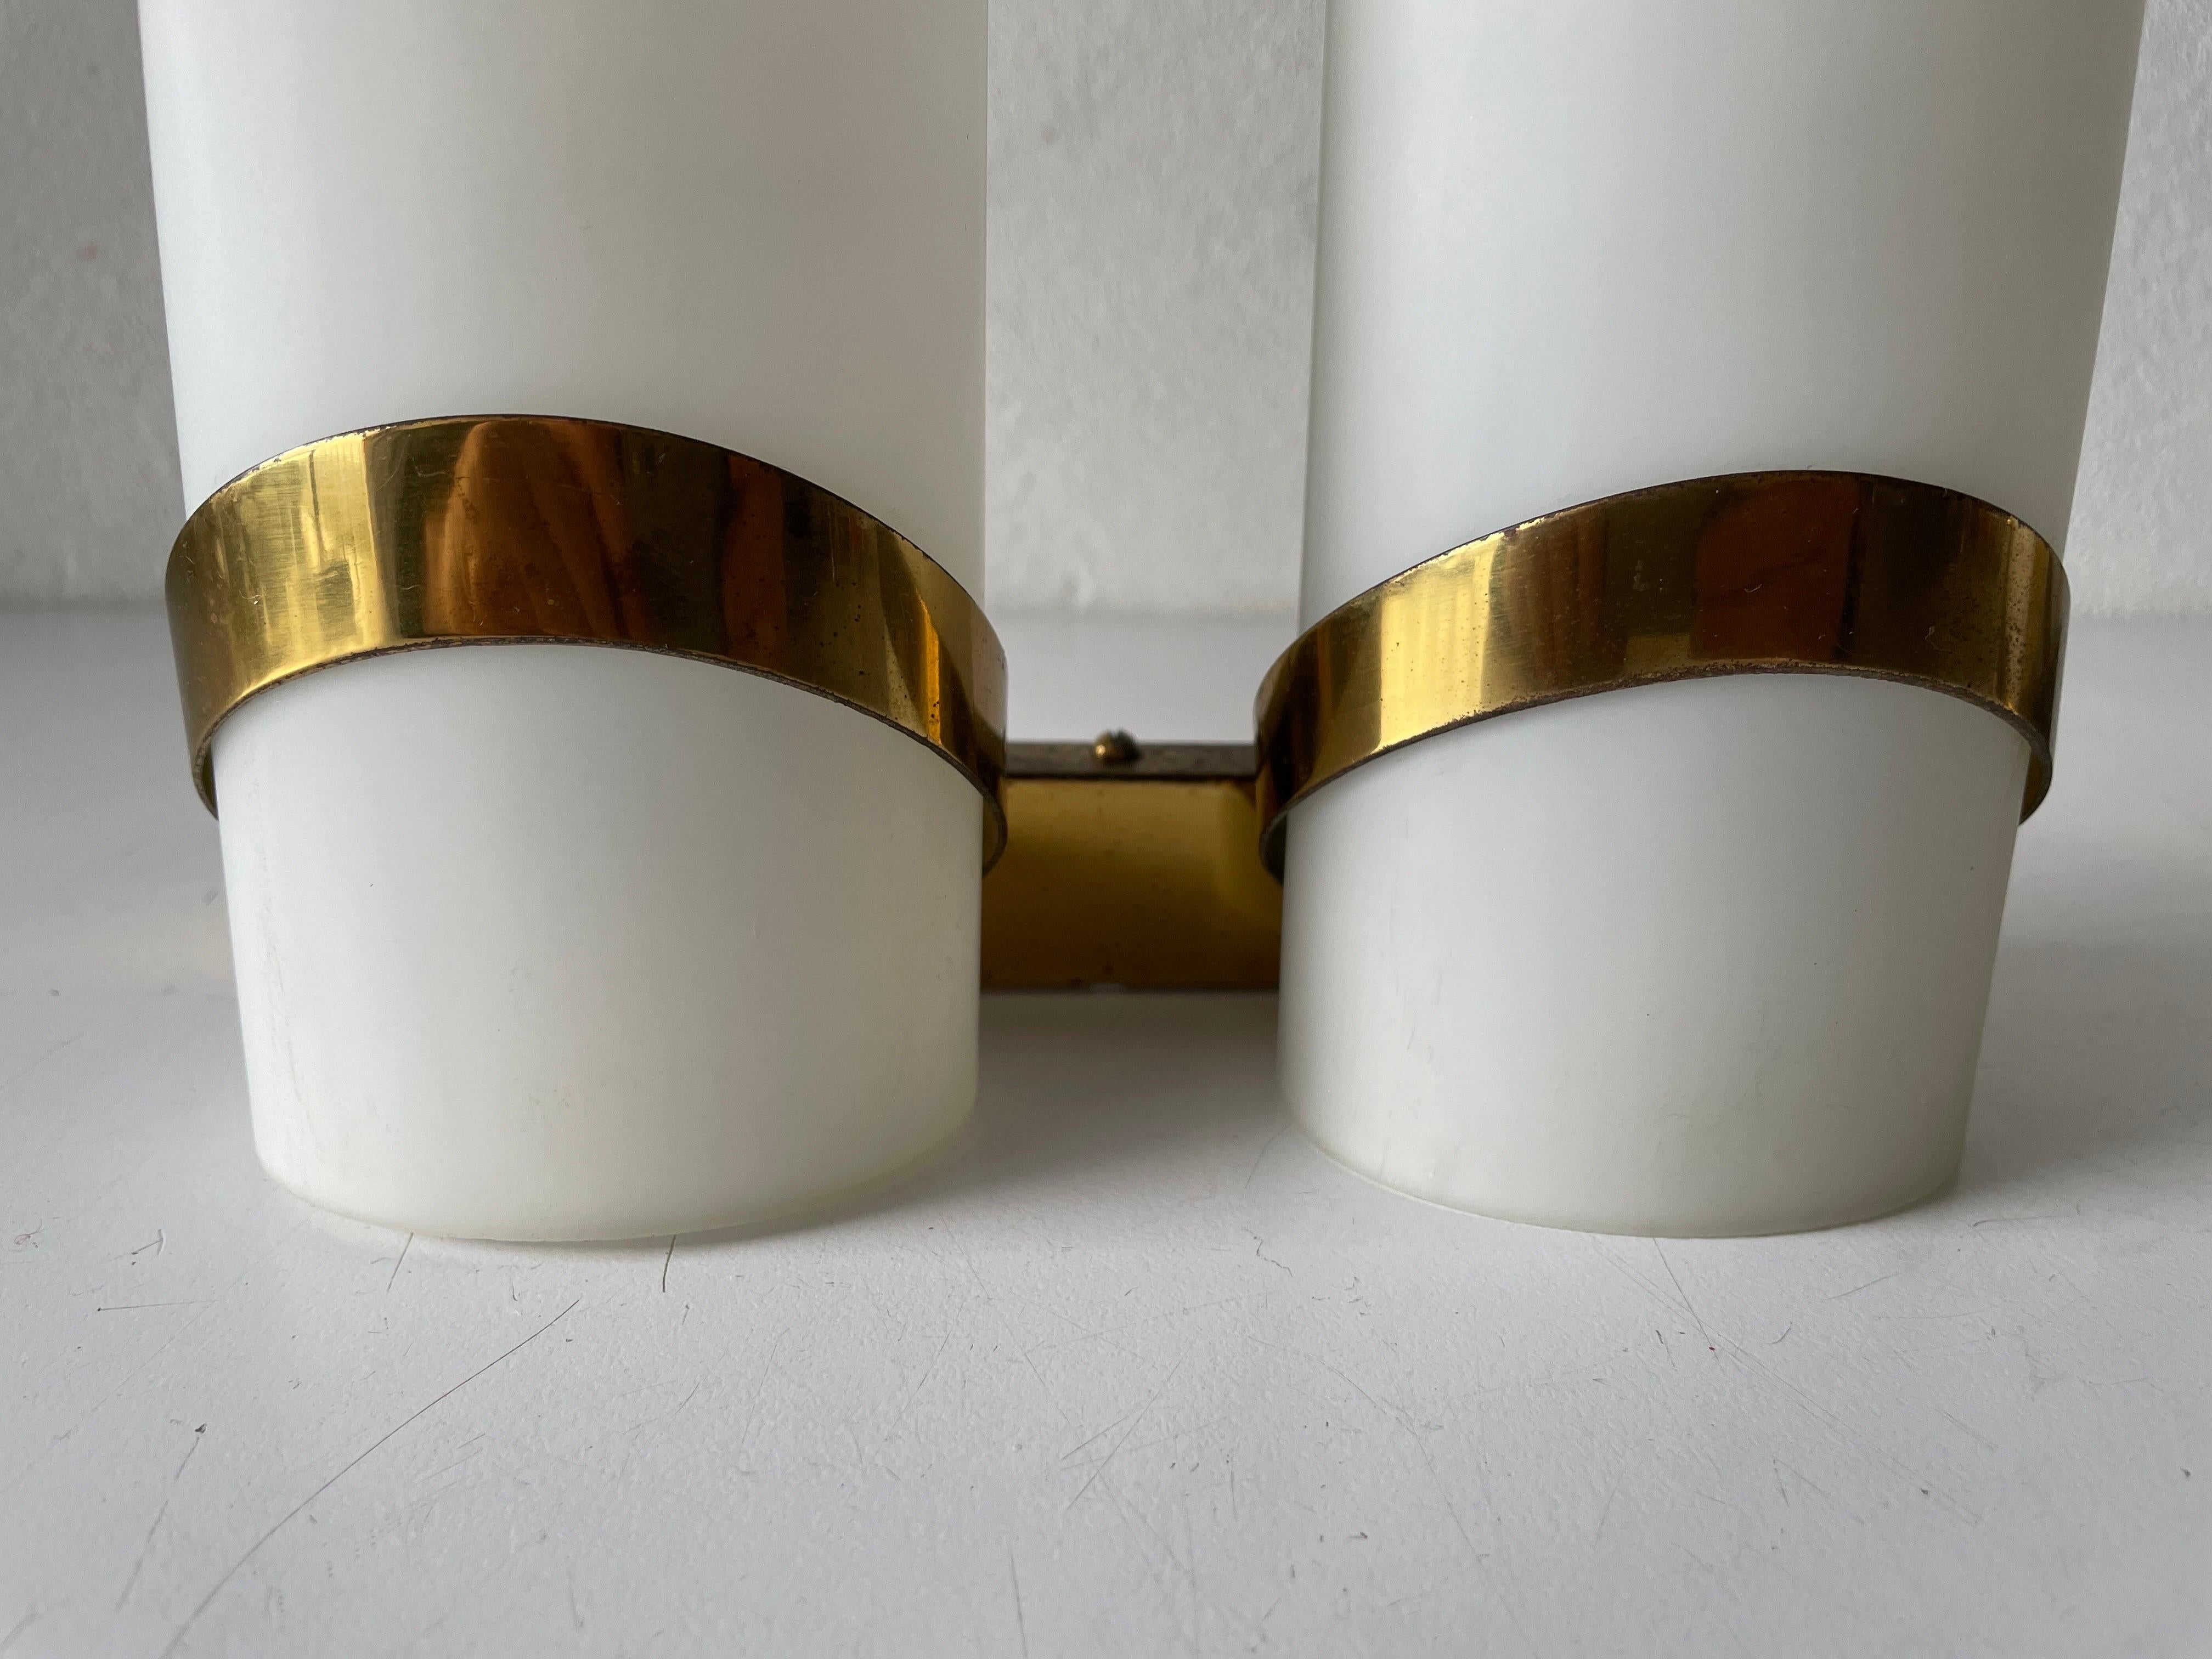 Italian Mid-Century Pair of Sconces by Stilnovo, 1950s, Italy For Sale